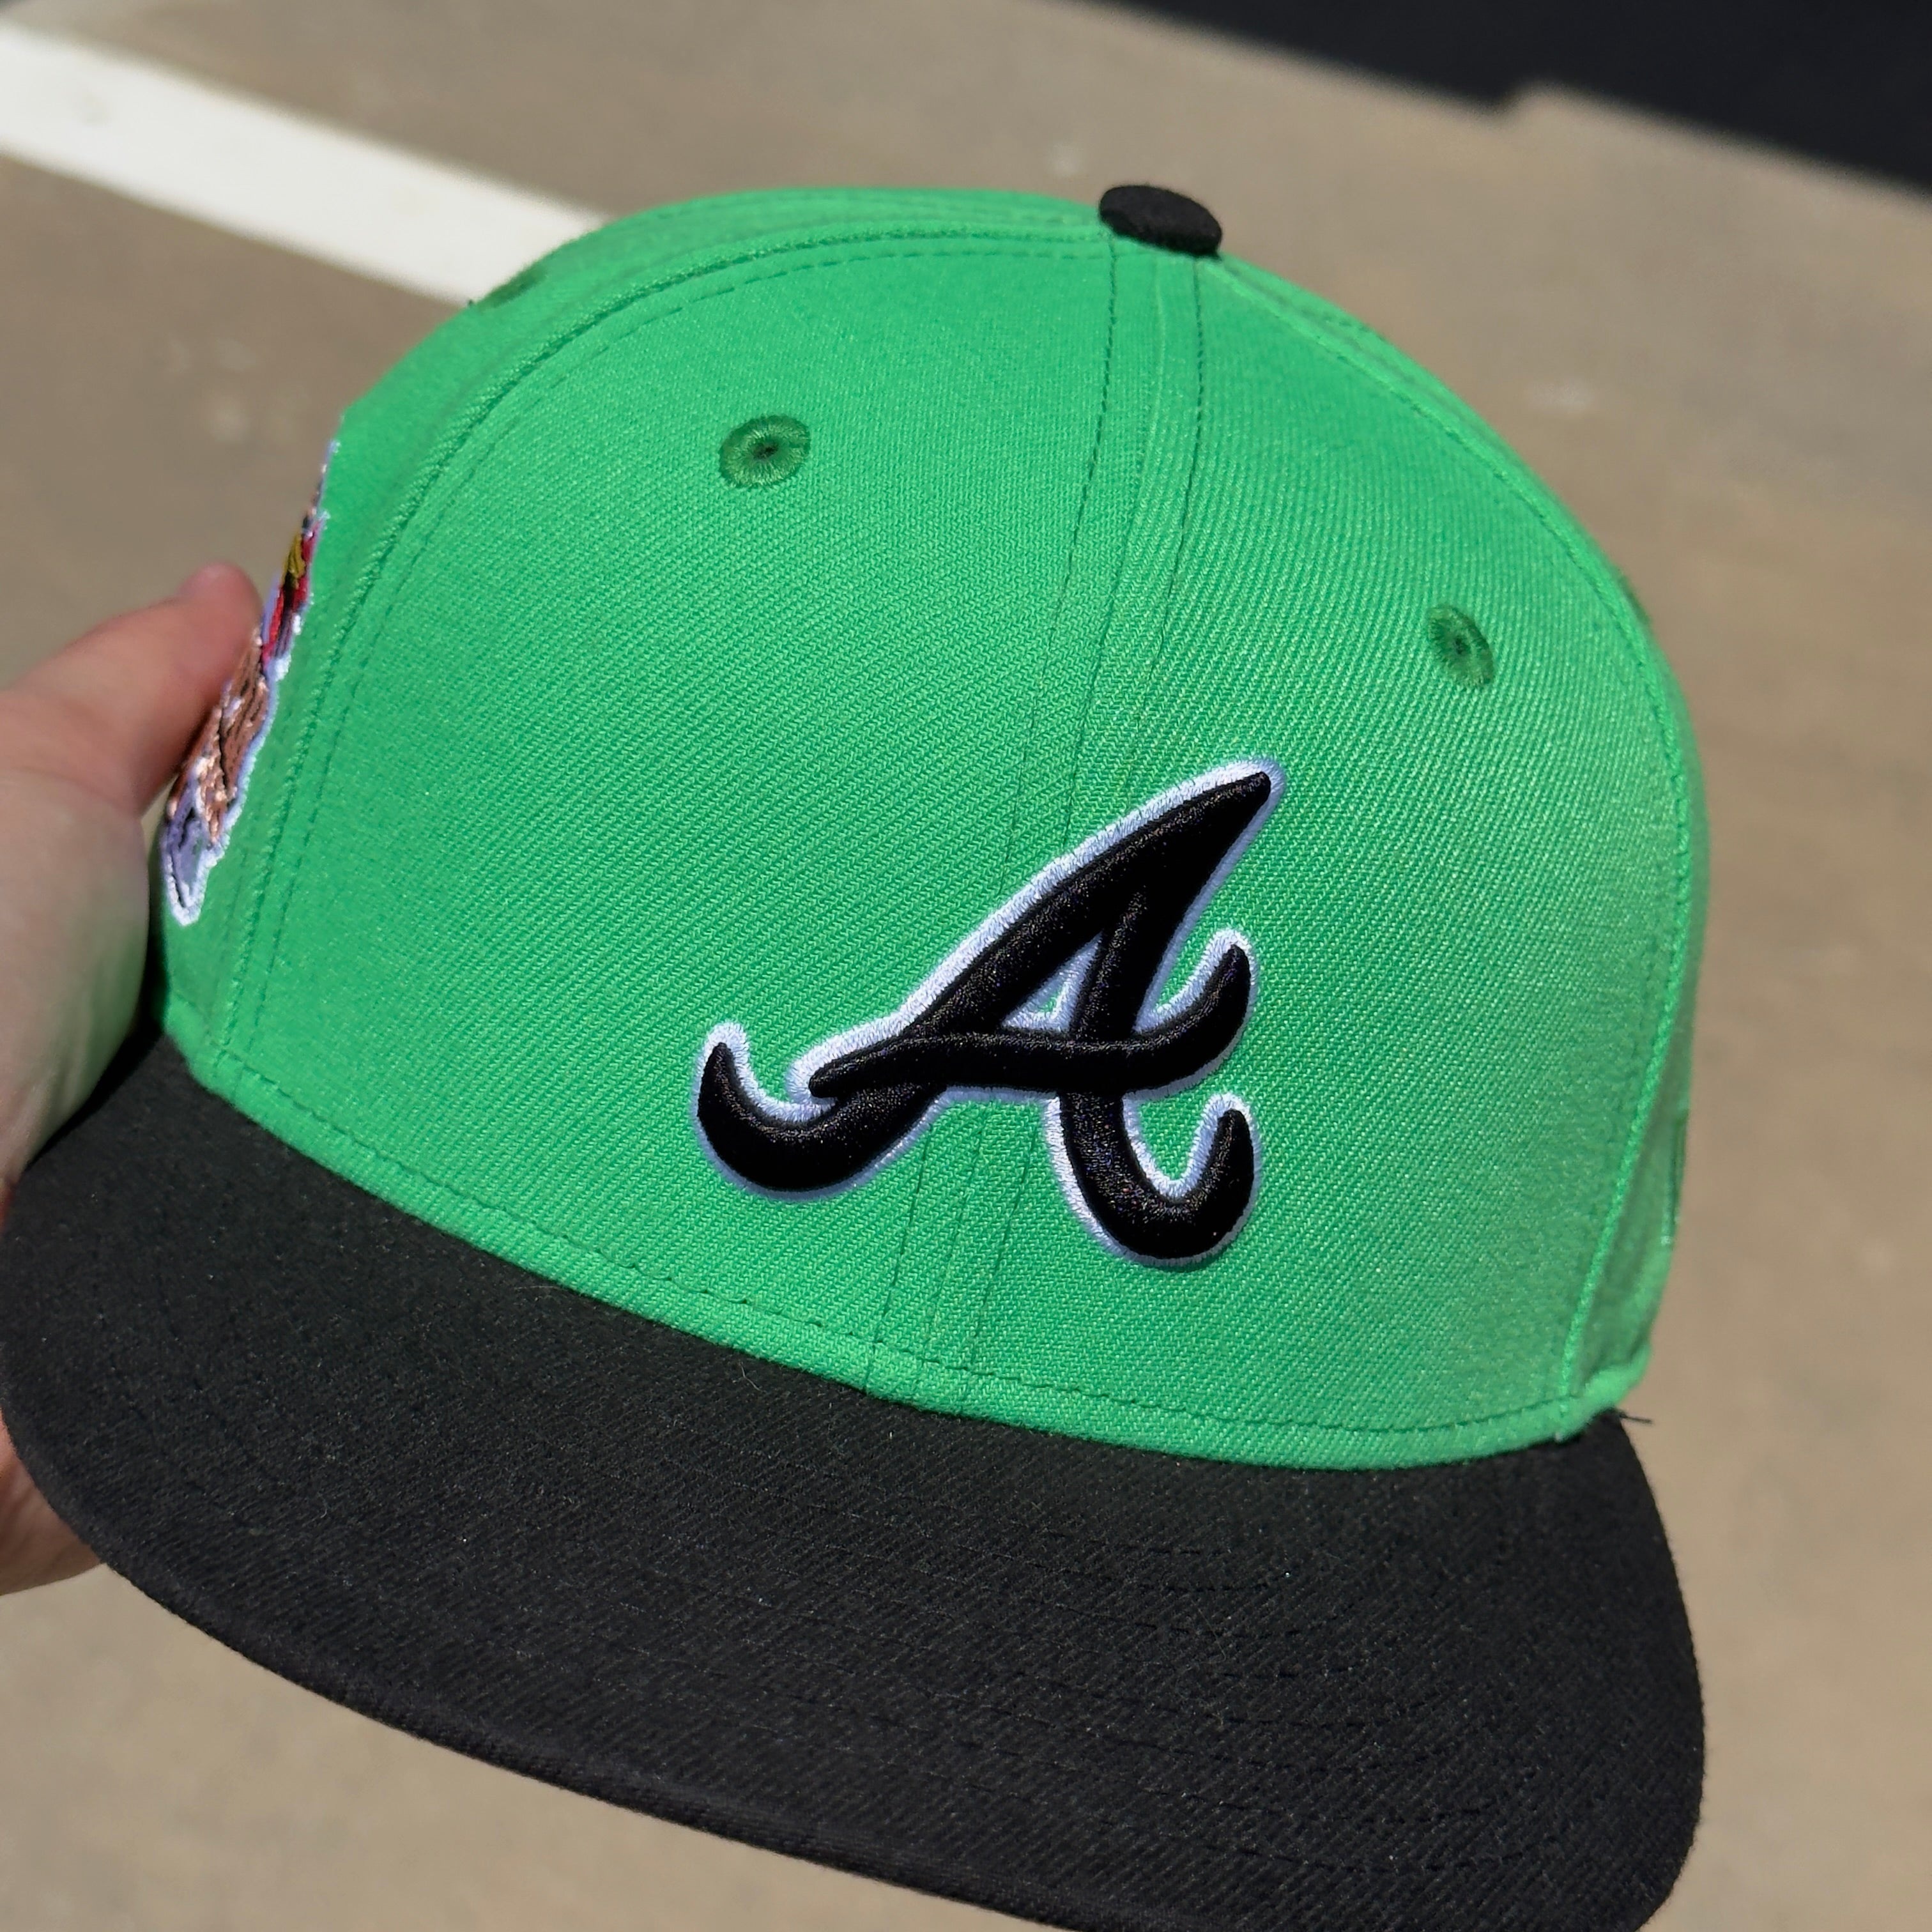 USED 3/8 Green Atlanta Braves All Star Game 2000 59FIFTY New Era Fitted Hat Cap